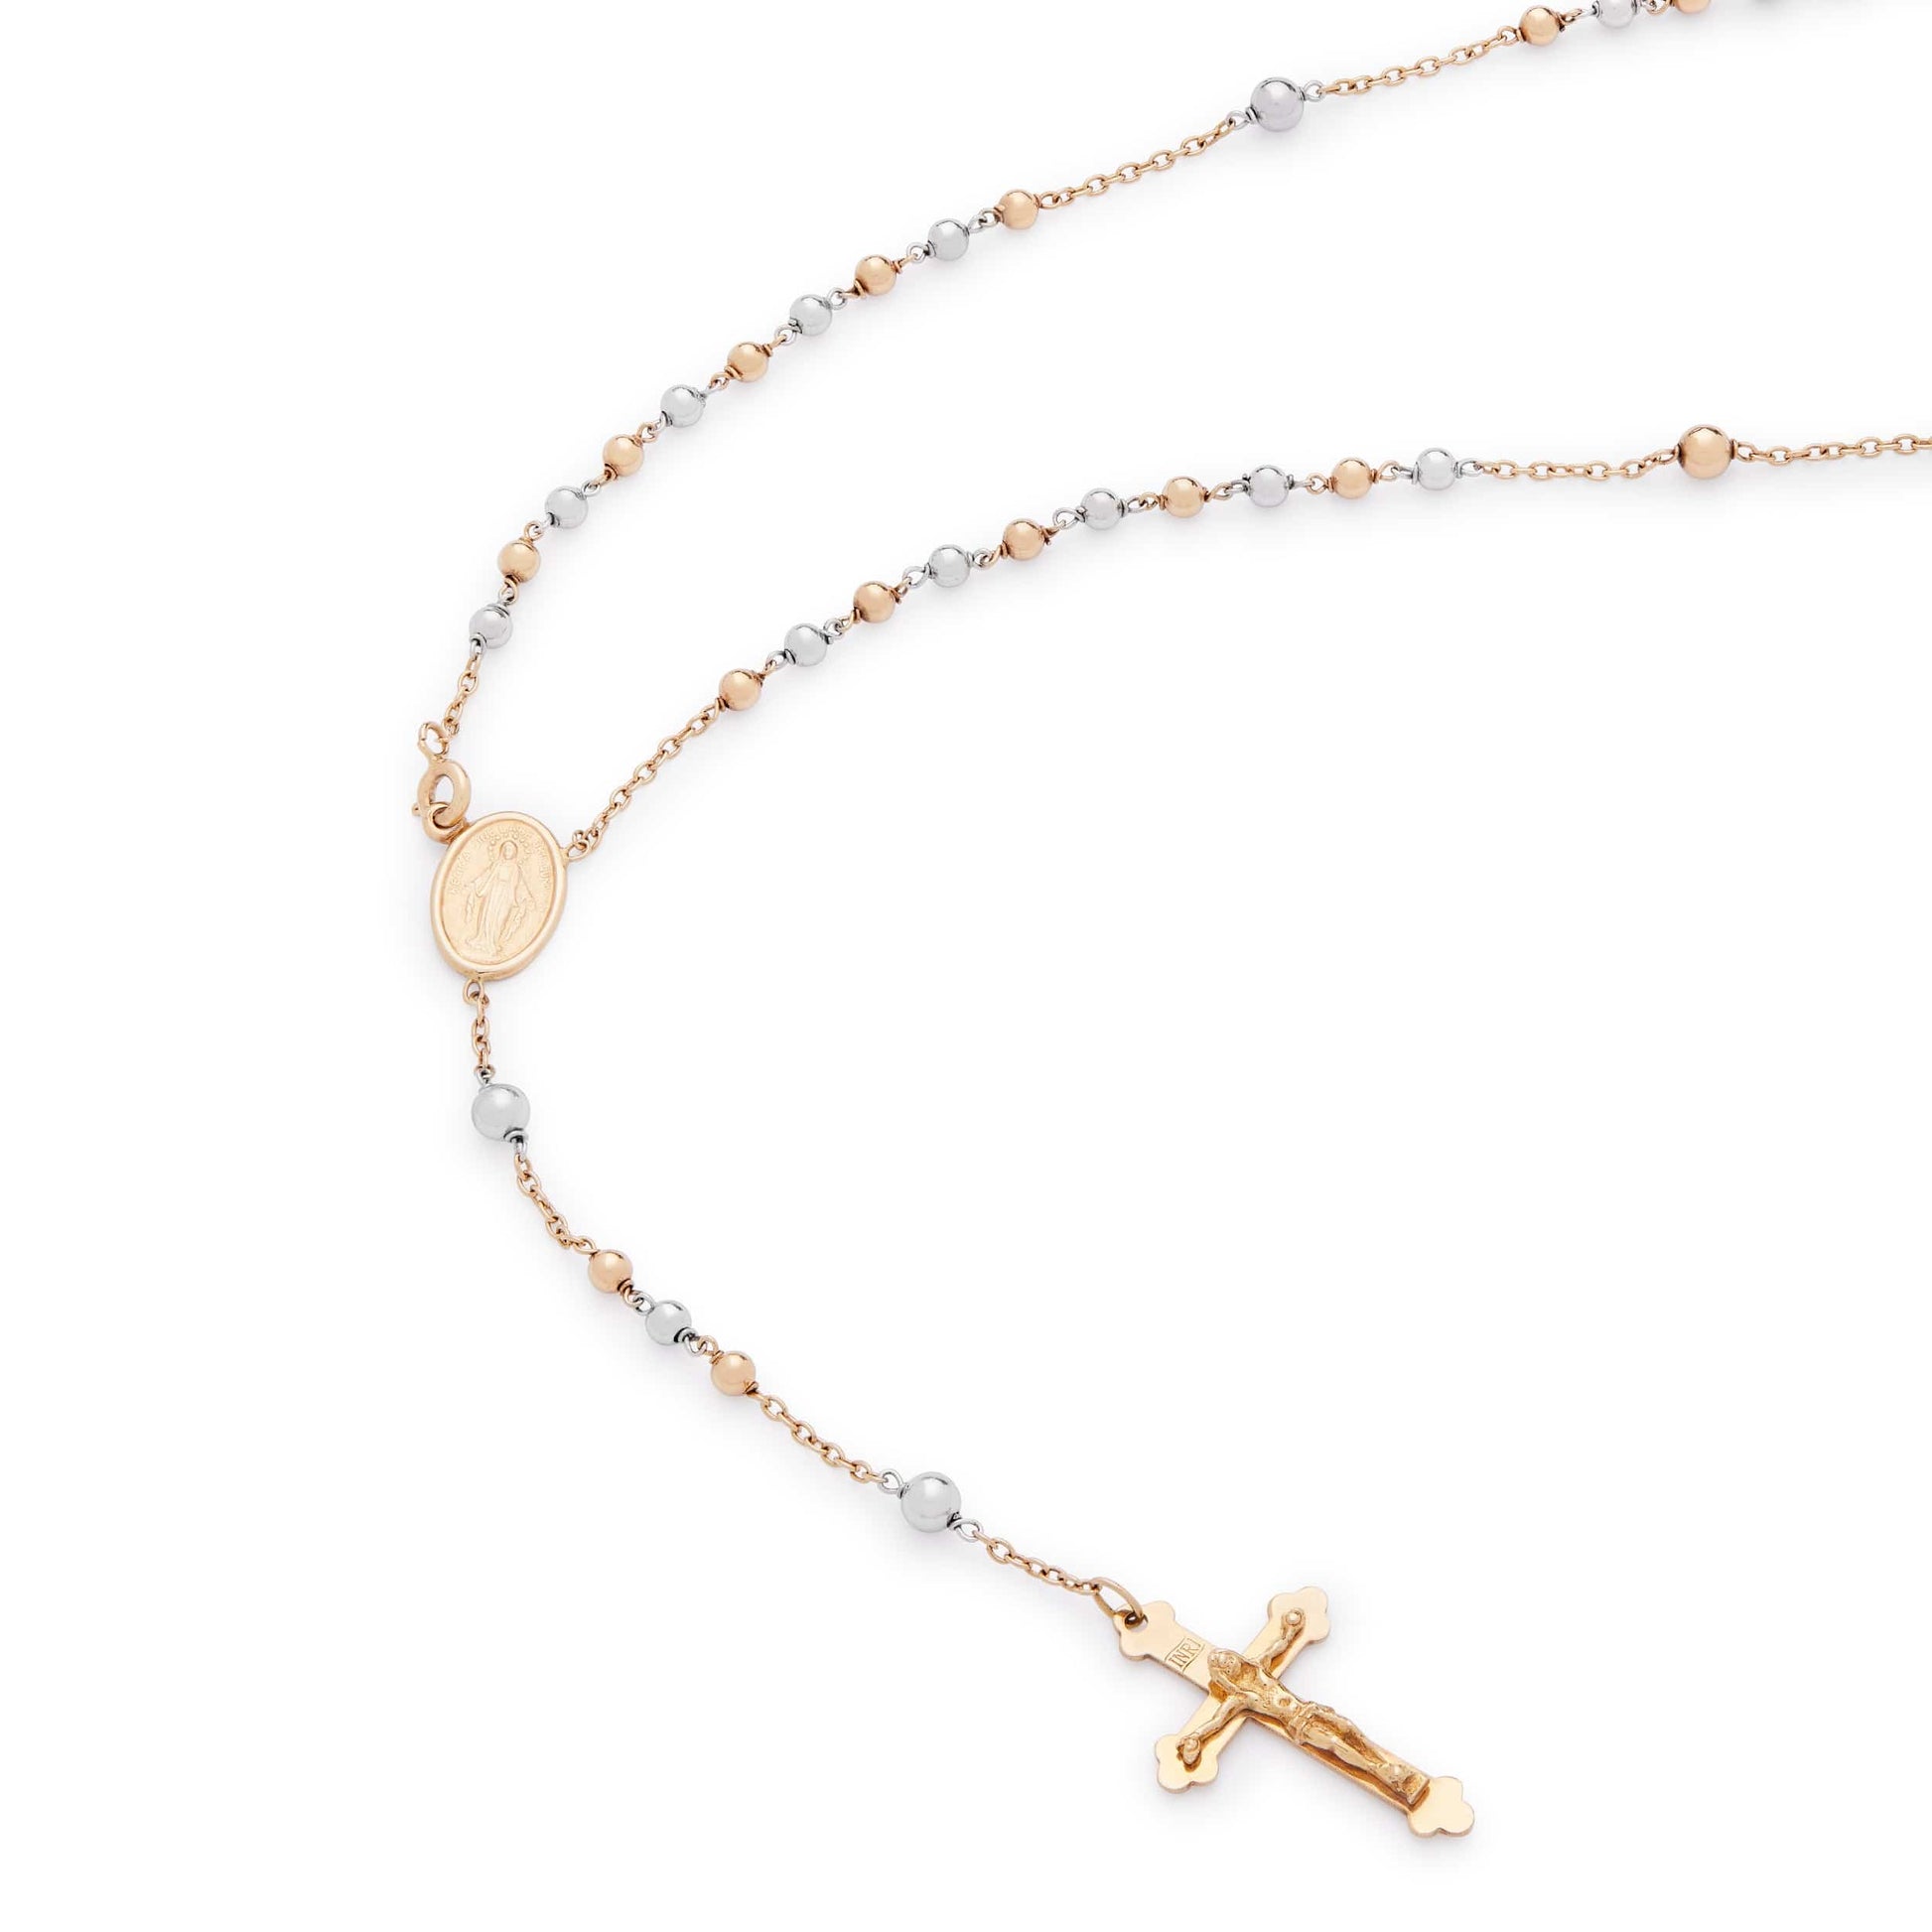 MONDO CATTOLICO Prayer Beads 35 cm (13.77 in) / 3 mm (0.11 in) Yellow and White Gold Rosary